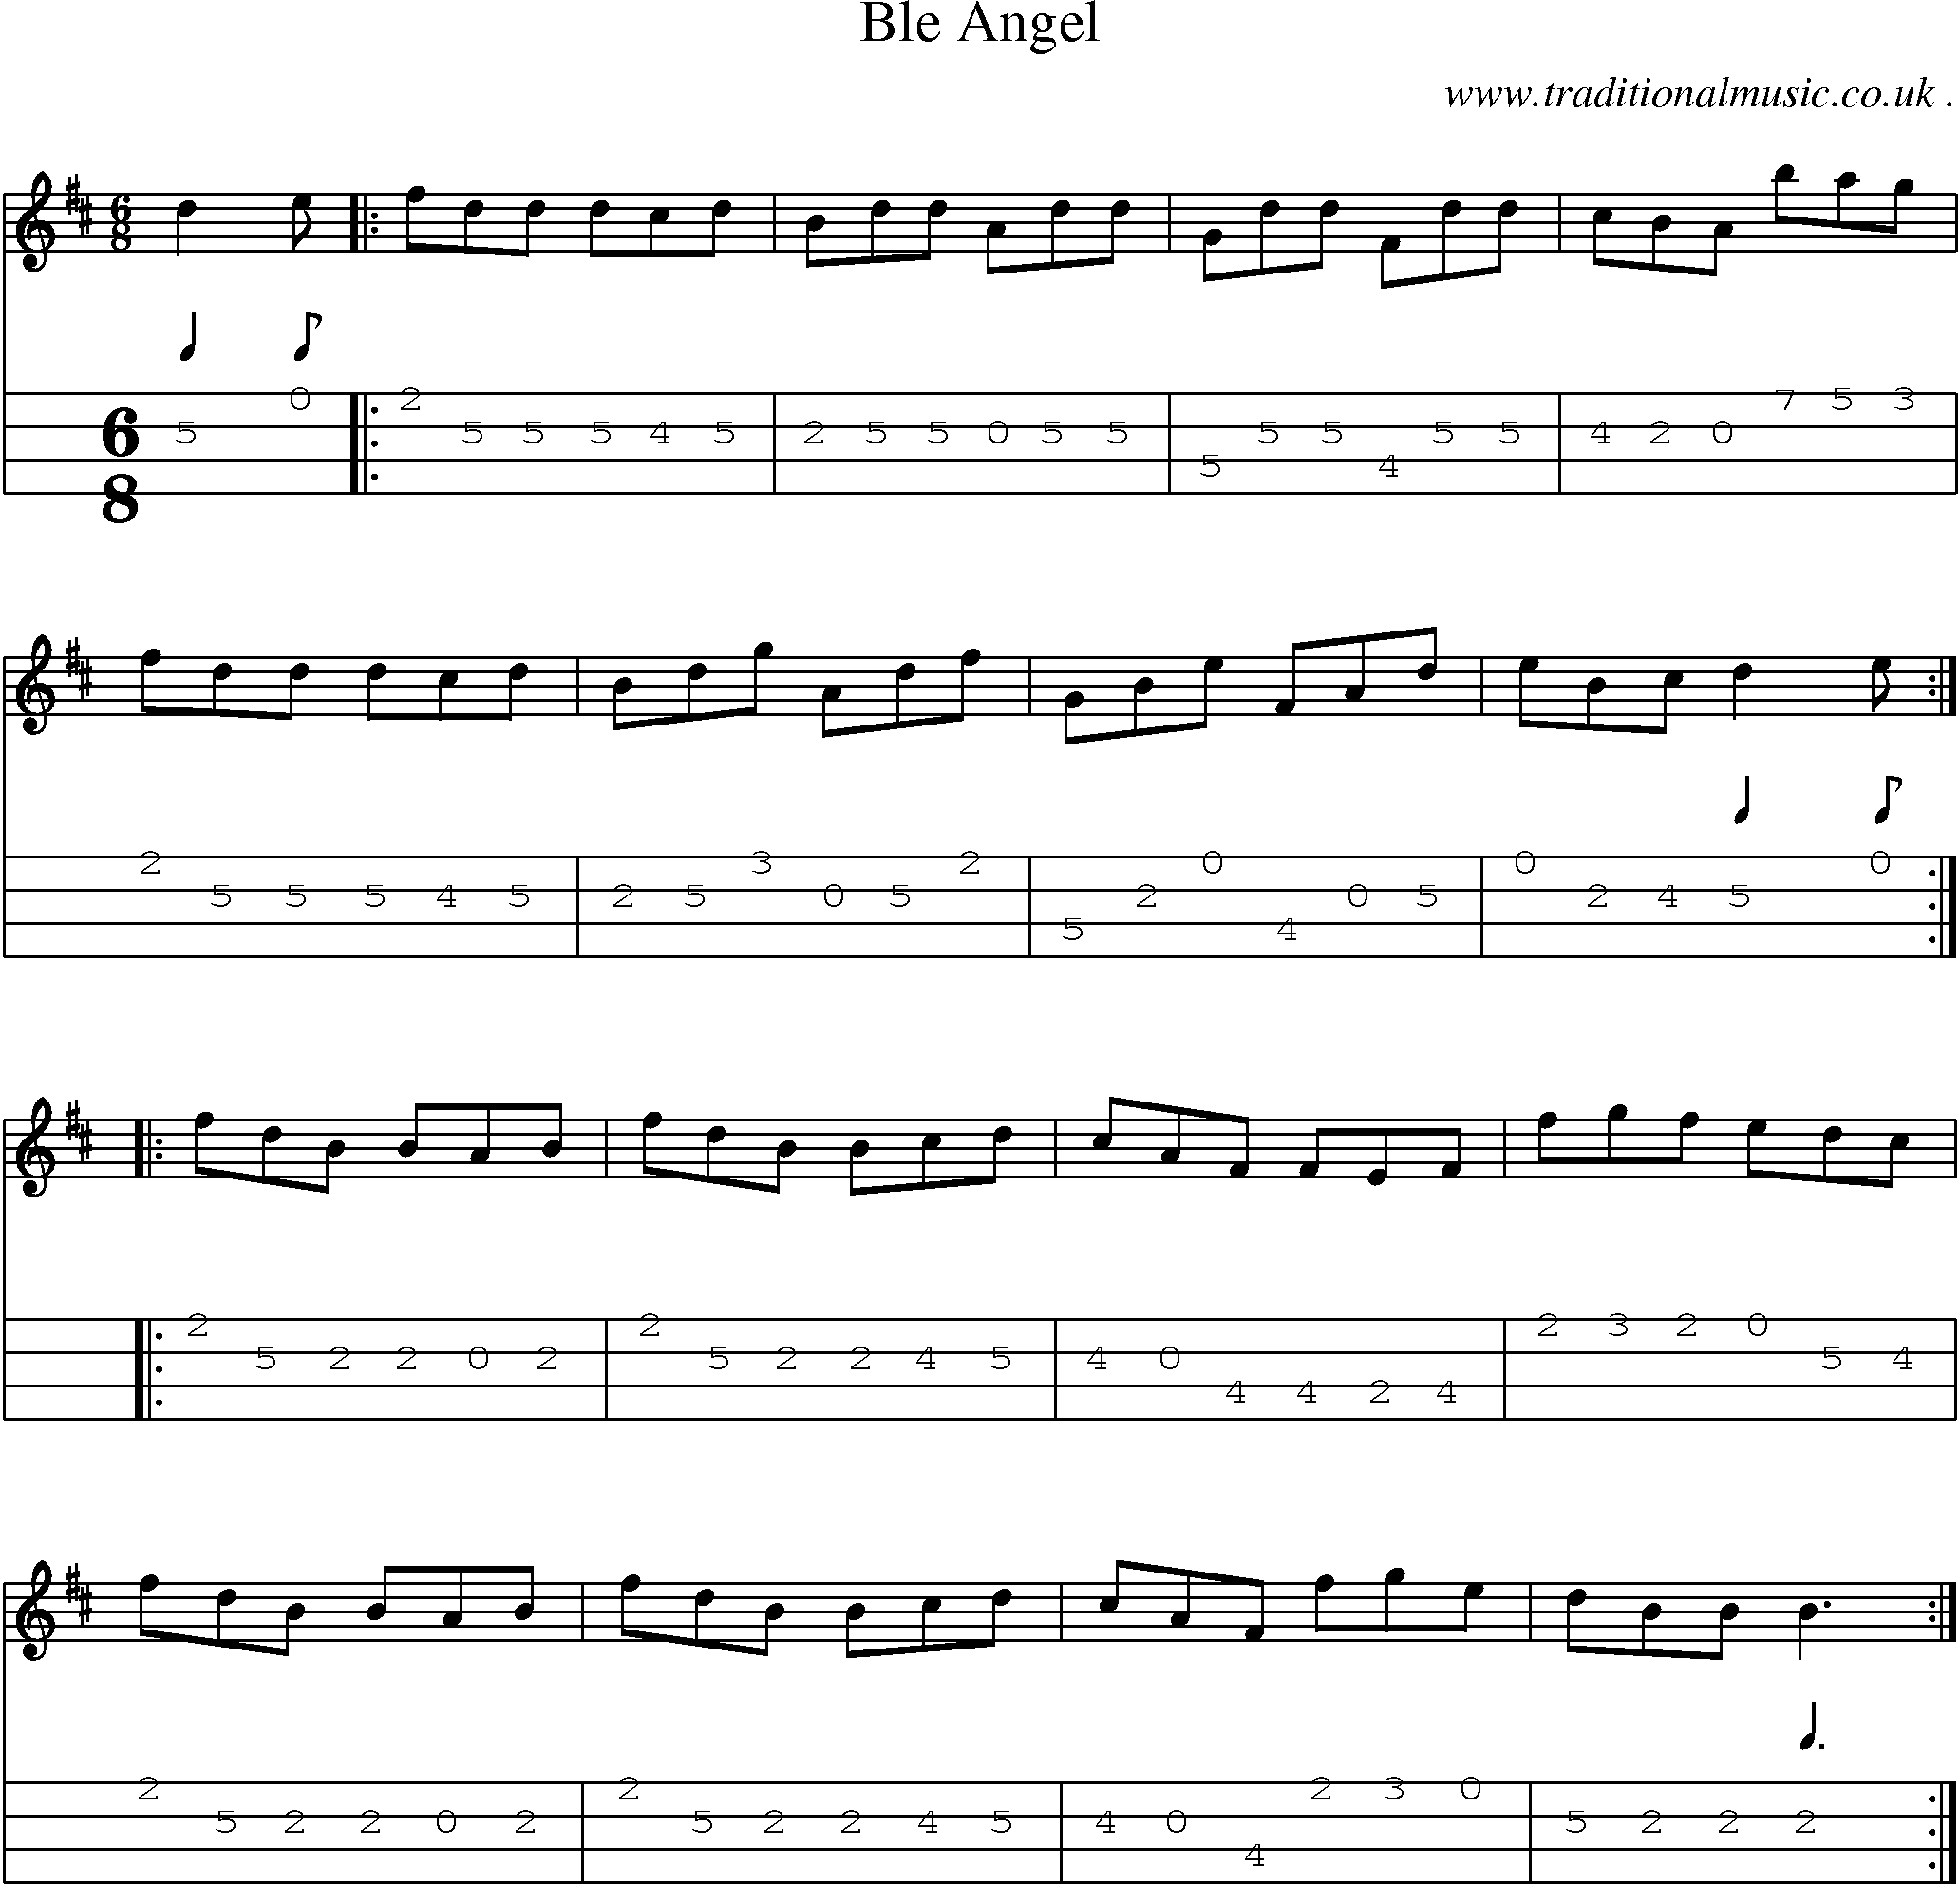 Sheet-Music and Mandolin Tabs for Ble Angel